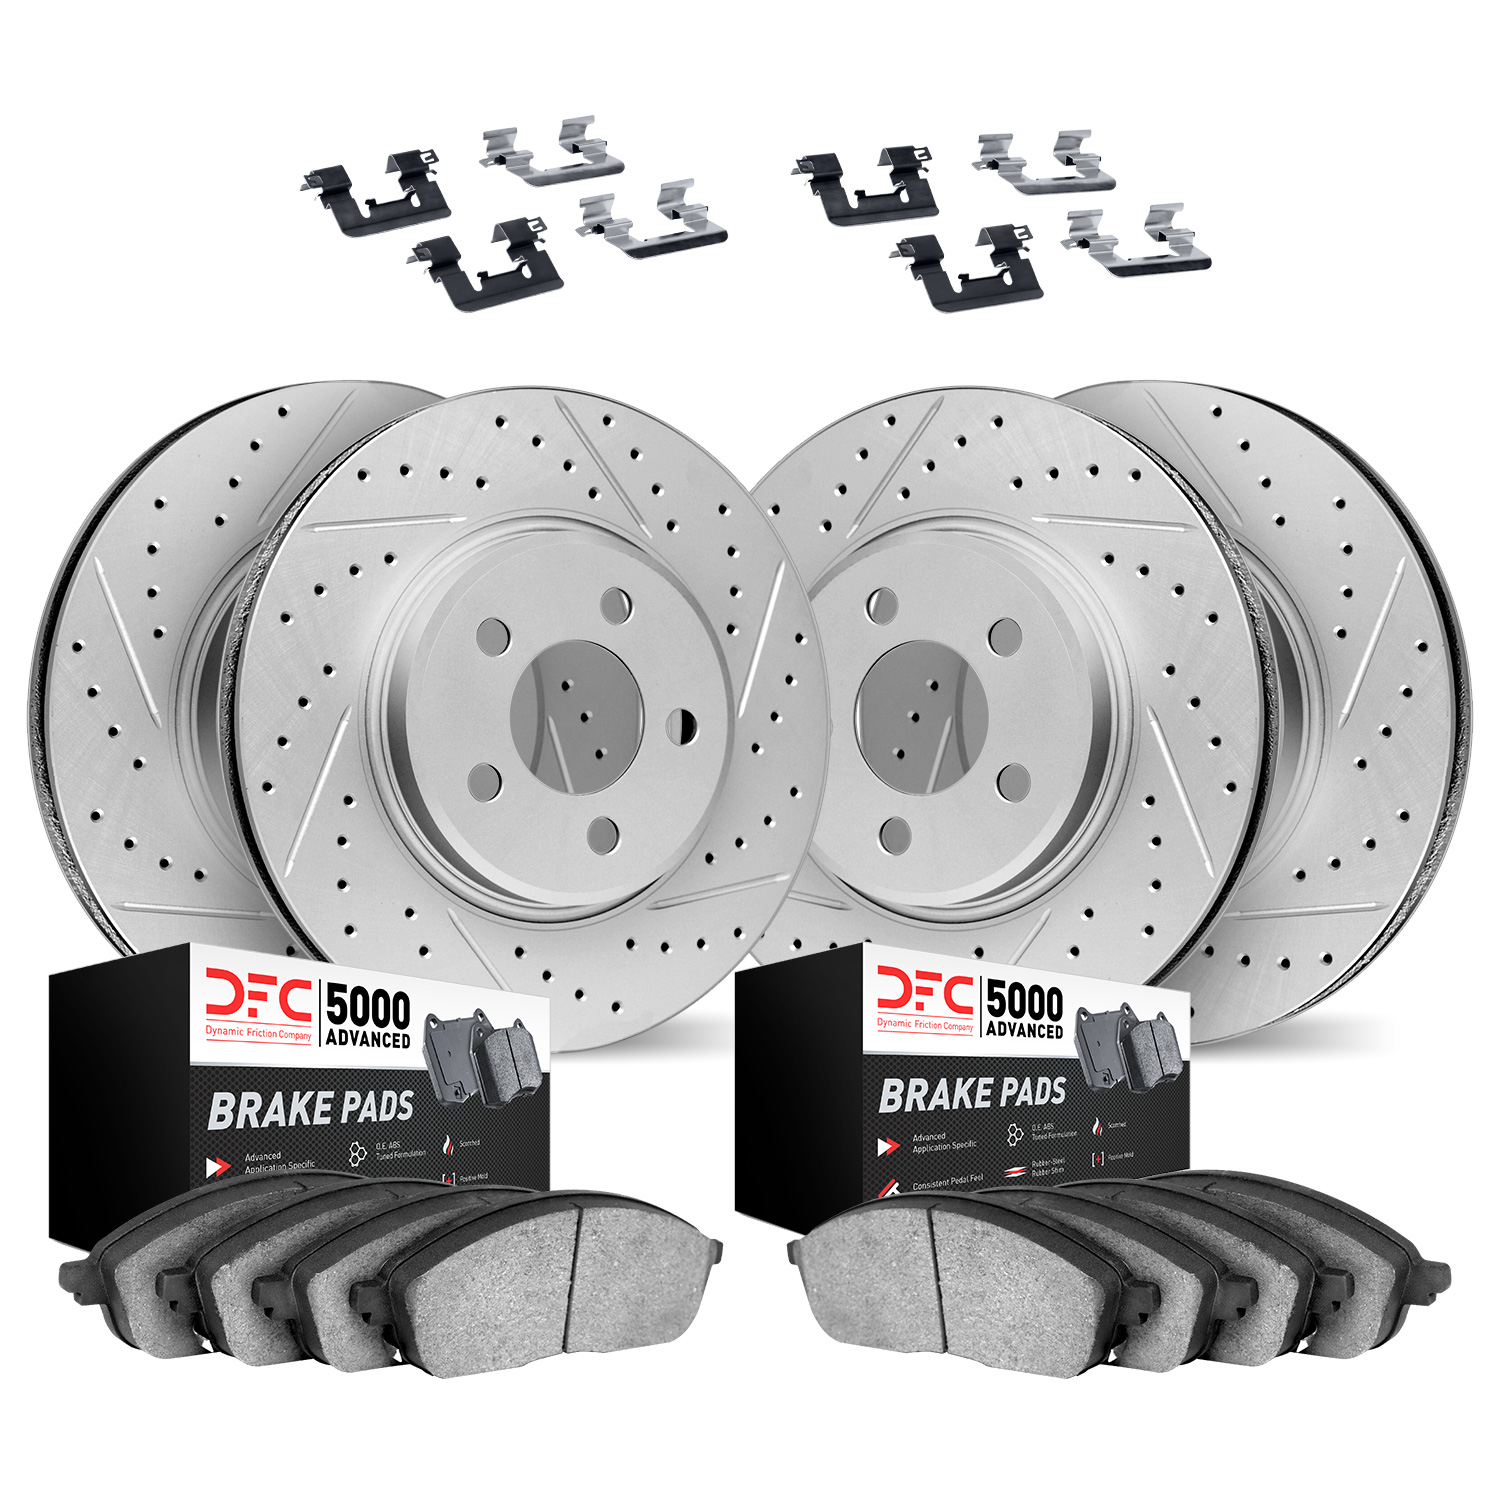 2514-46015 Geoperformance Drilled/Slotted Rotors w/5000 Advanced Brake Pads Kit & Hardware, 2009-2011 GM, Position: Front and Re